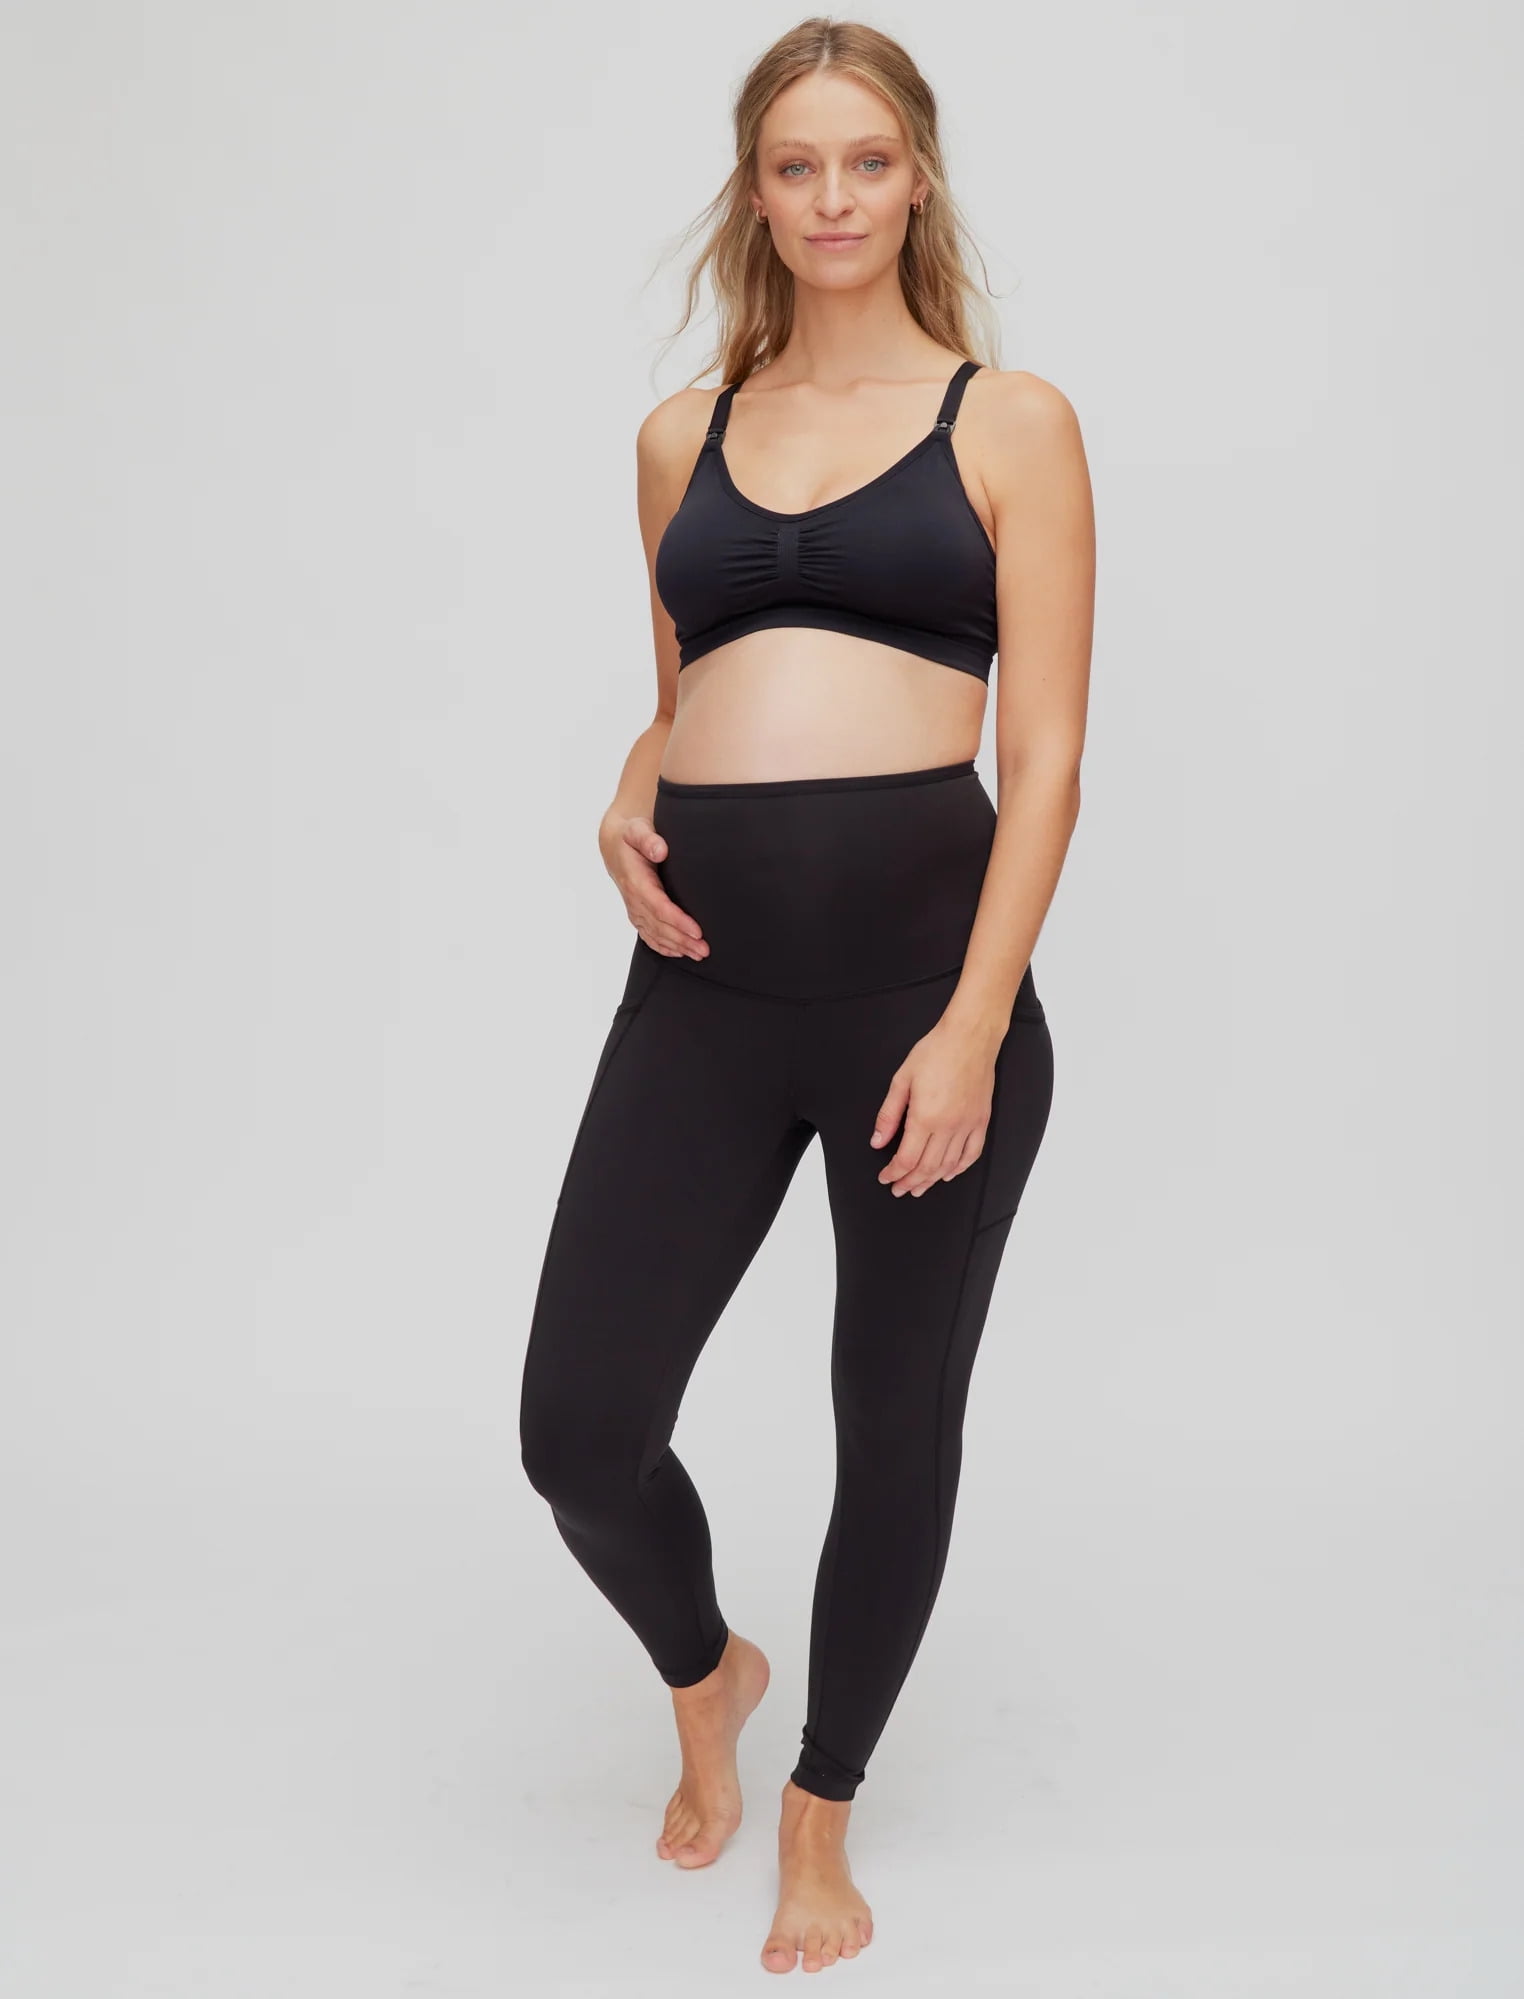 Maternity Lingerie & Tights - The latest trends